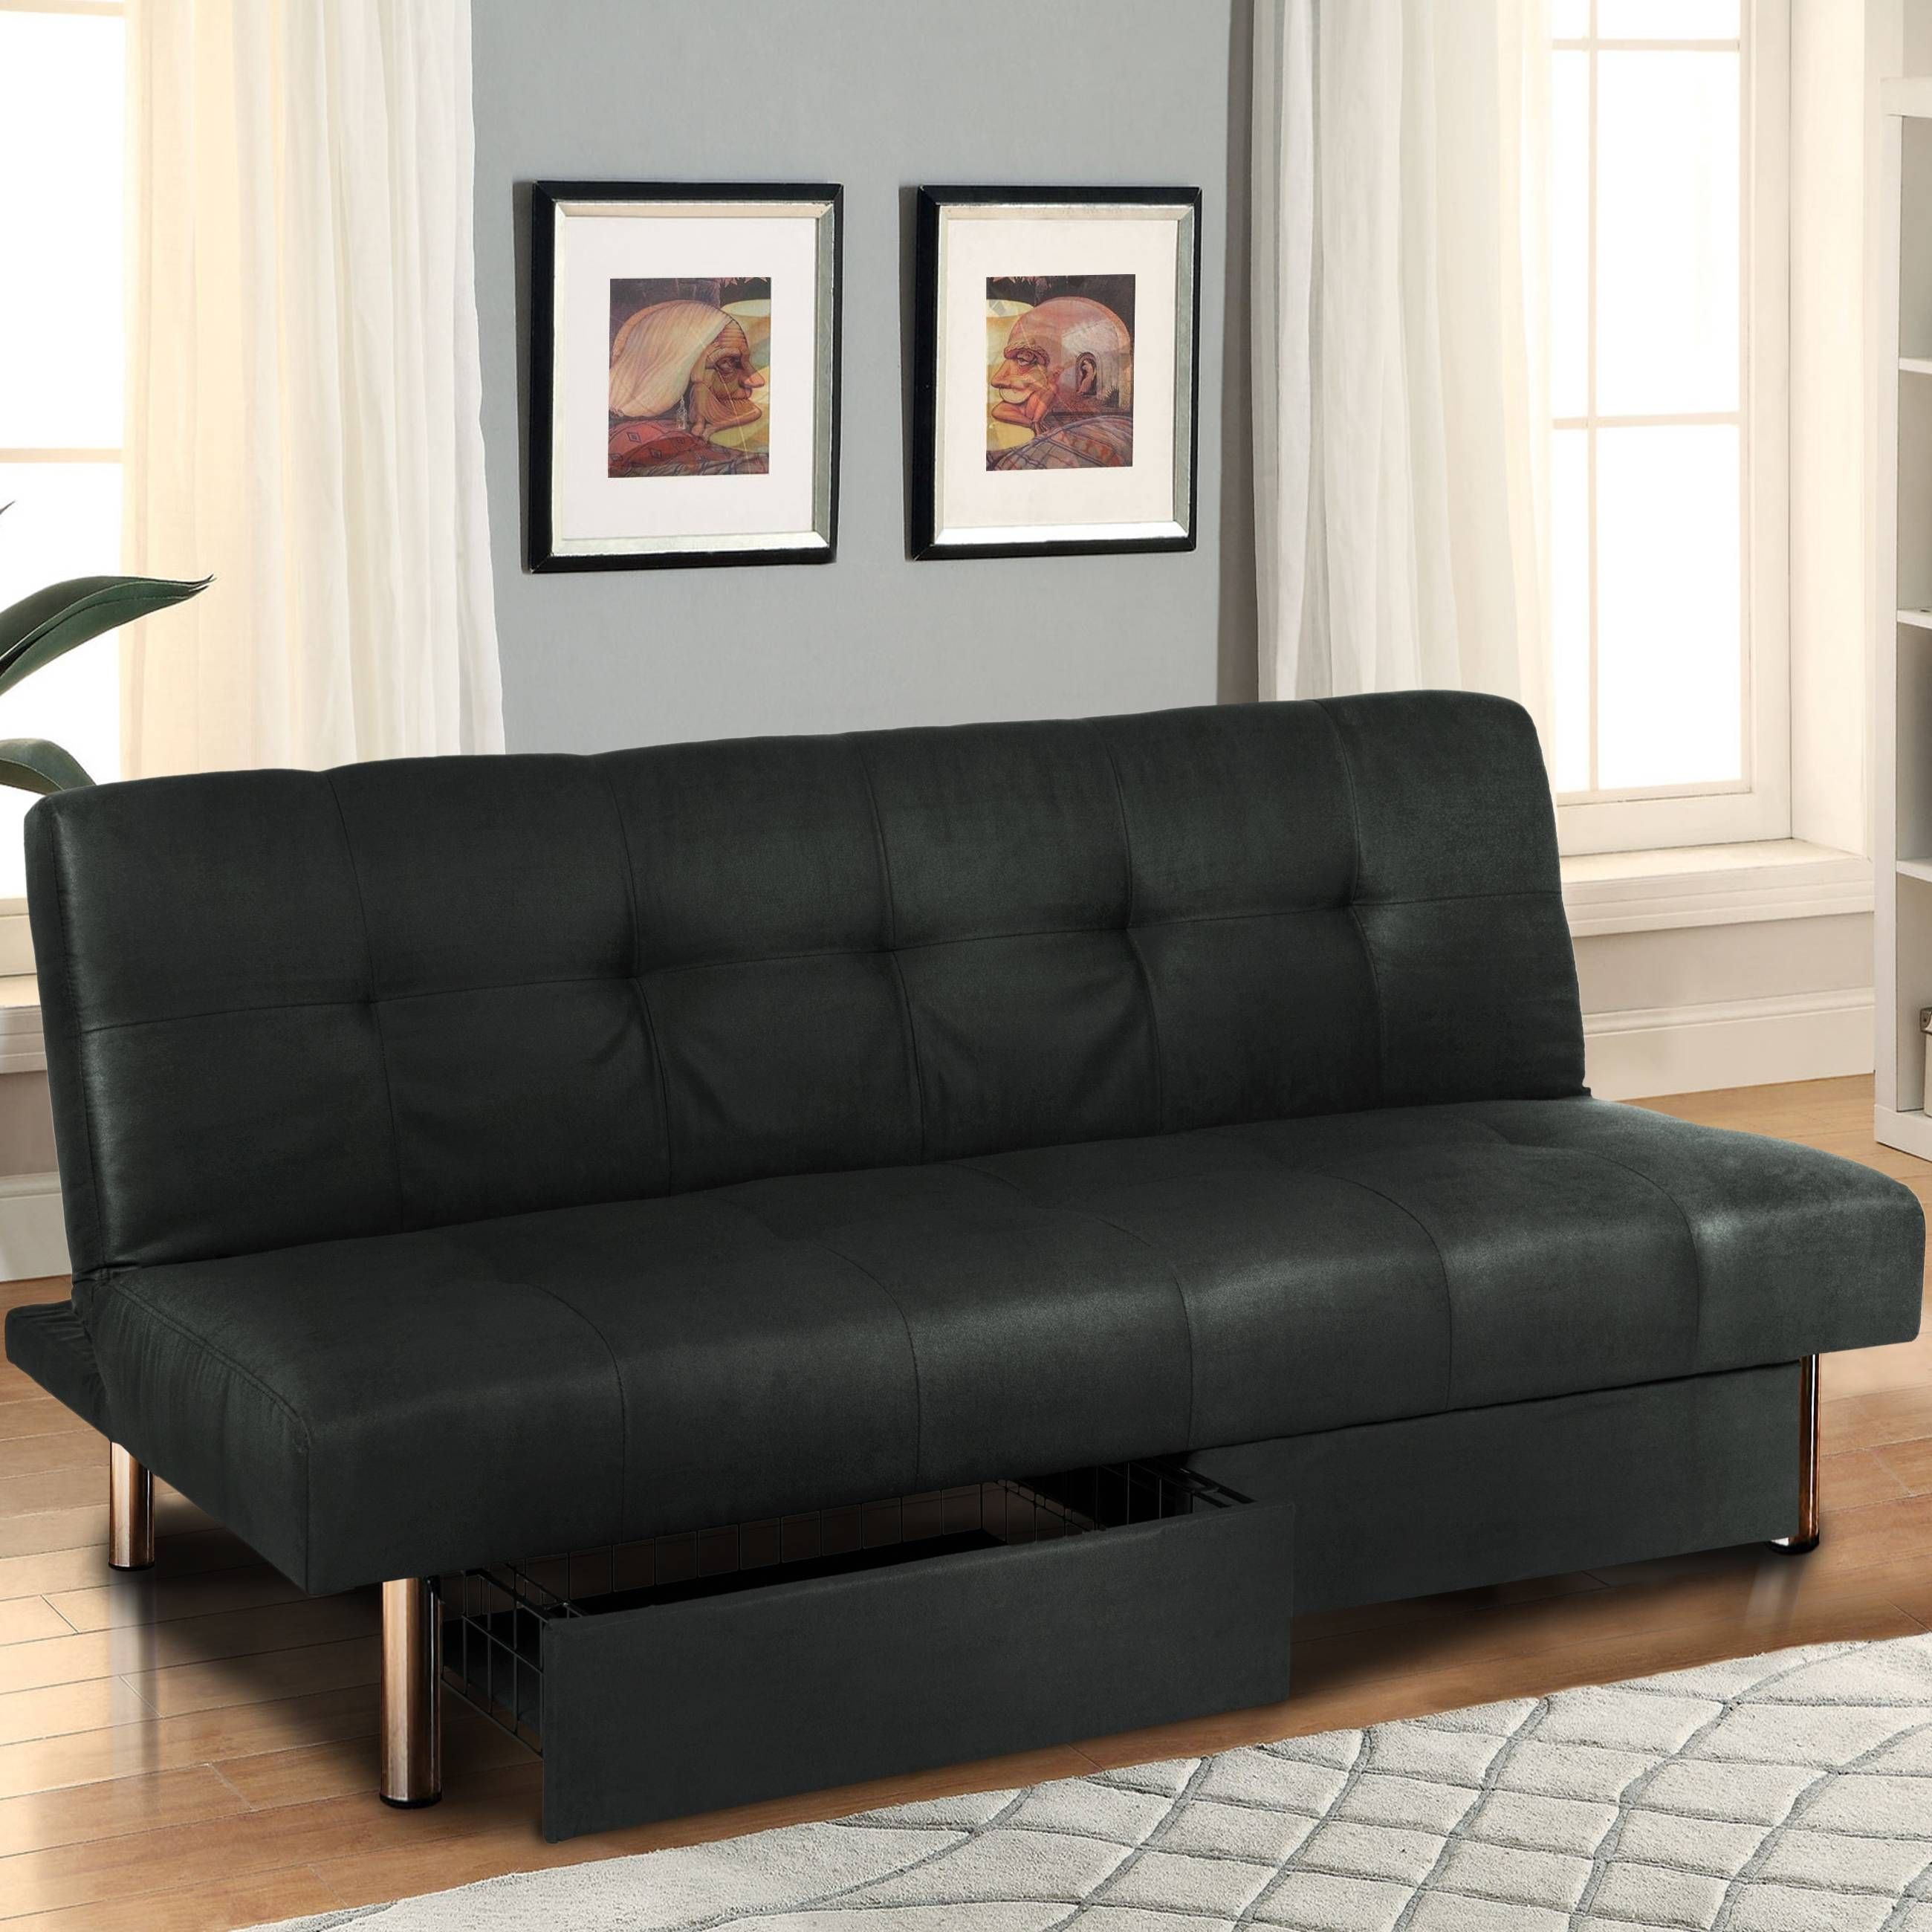 Microfiber Futon Folding Sofa Bed Couch Mattress & Storage Intended For Sofa Lounger Beds (View 5 of 30)